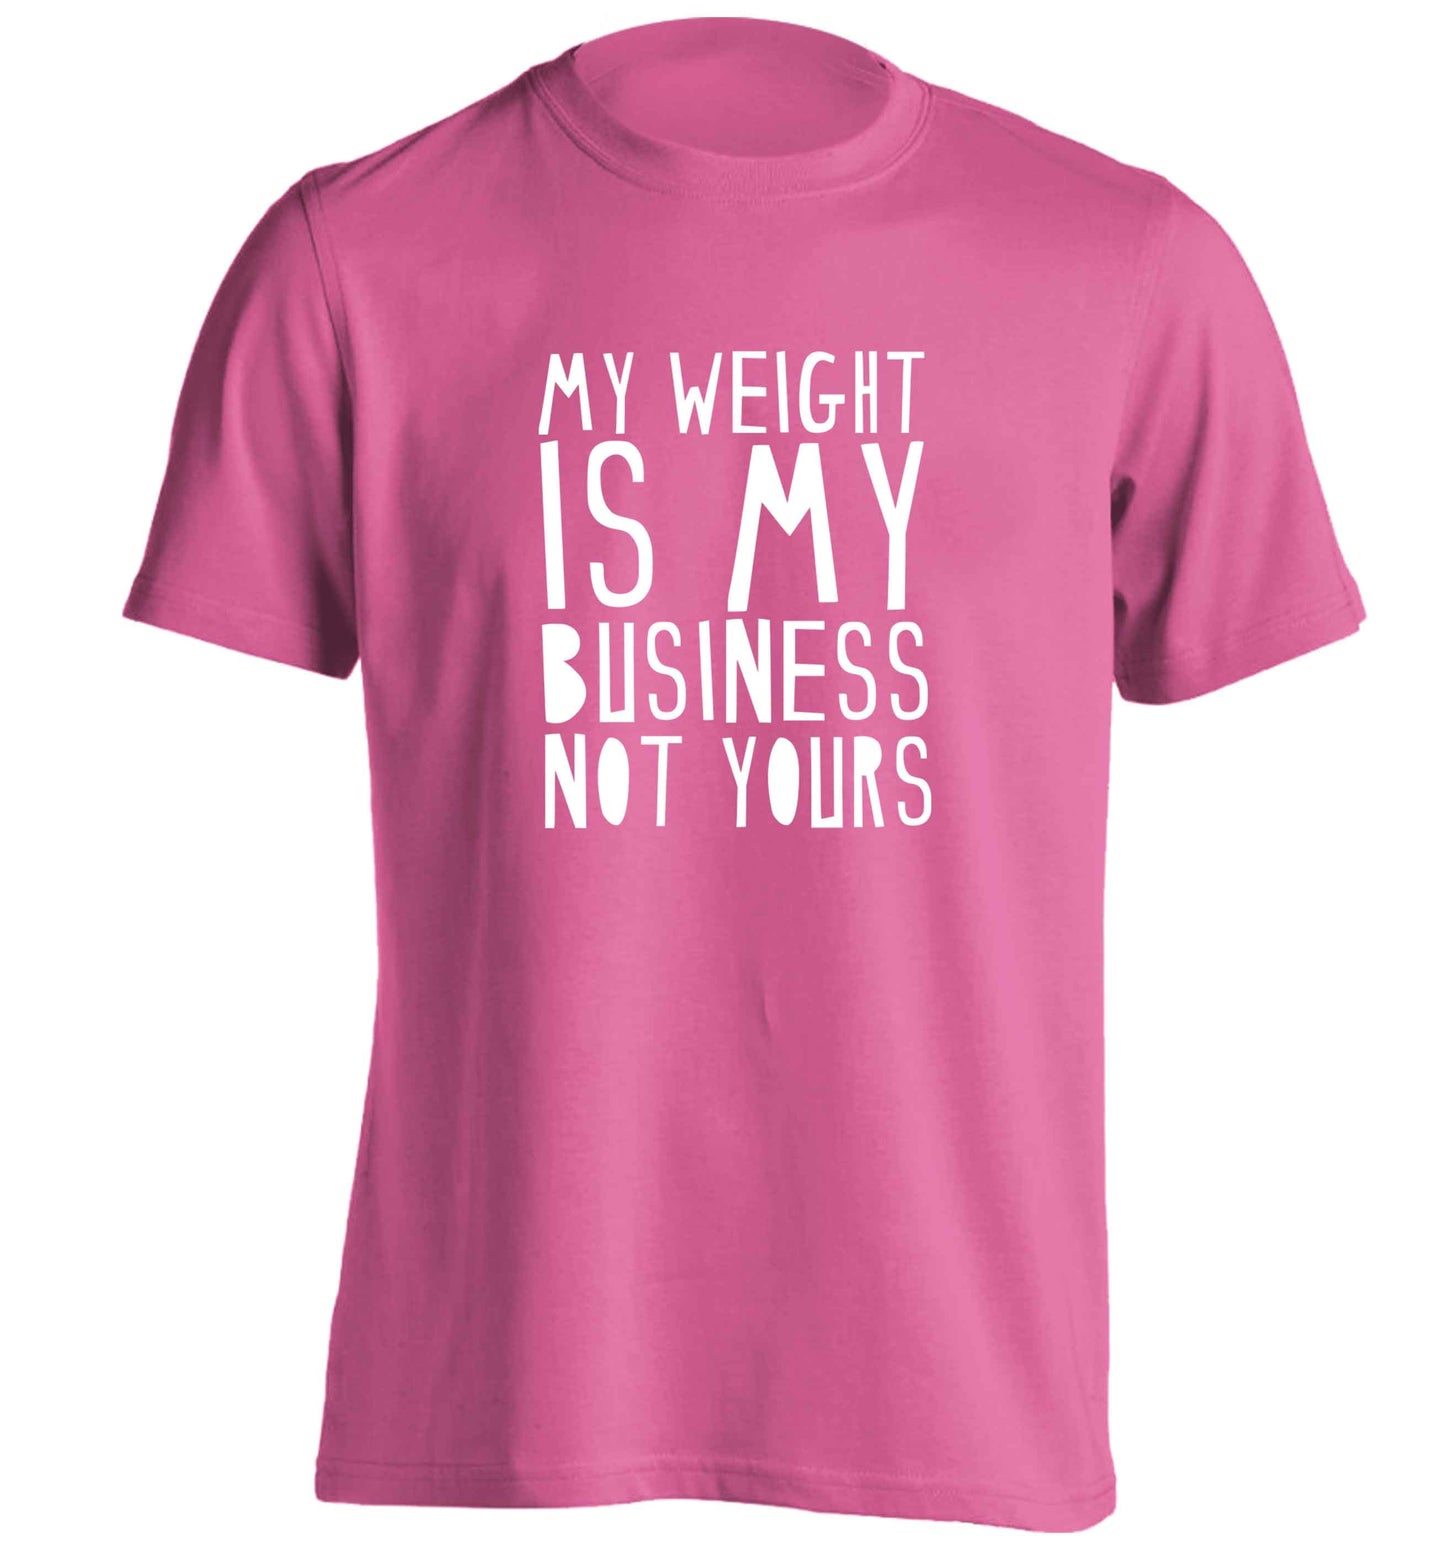 My weight is my business not yours adults unisex pink Tshirt 2XL